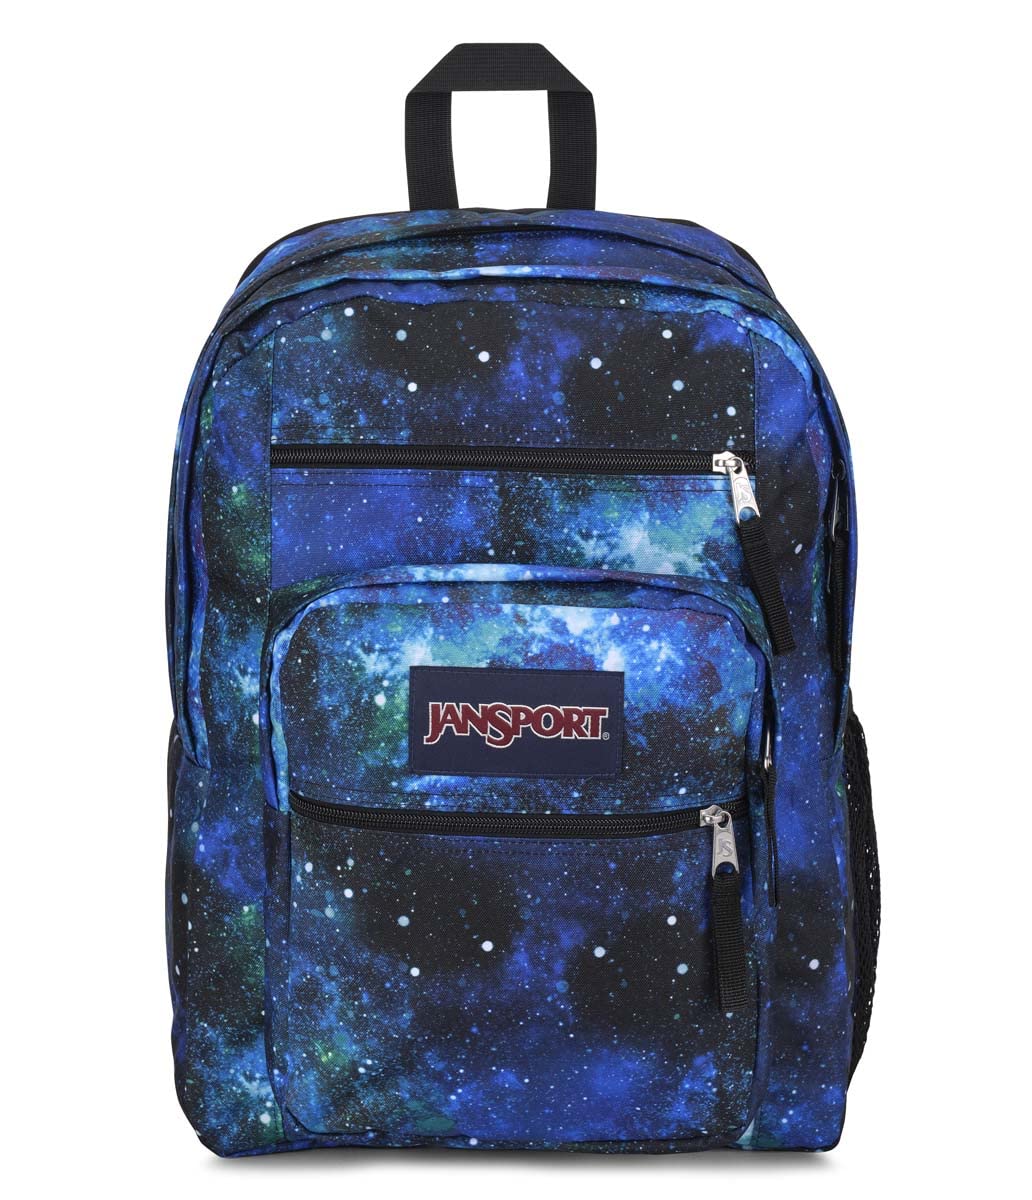 JanSport Big Student Backpack-Travel, or Work Bookbag with 15-Inch Laptop Compartment, Cyberspace Galaxy, One Size